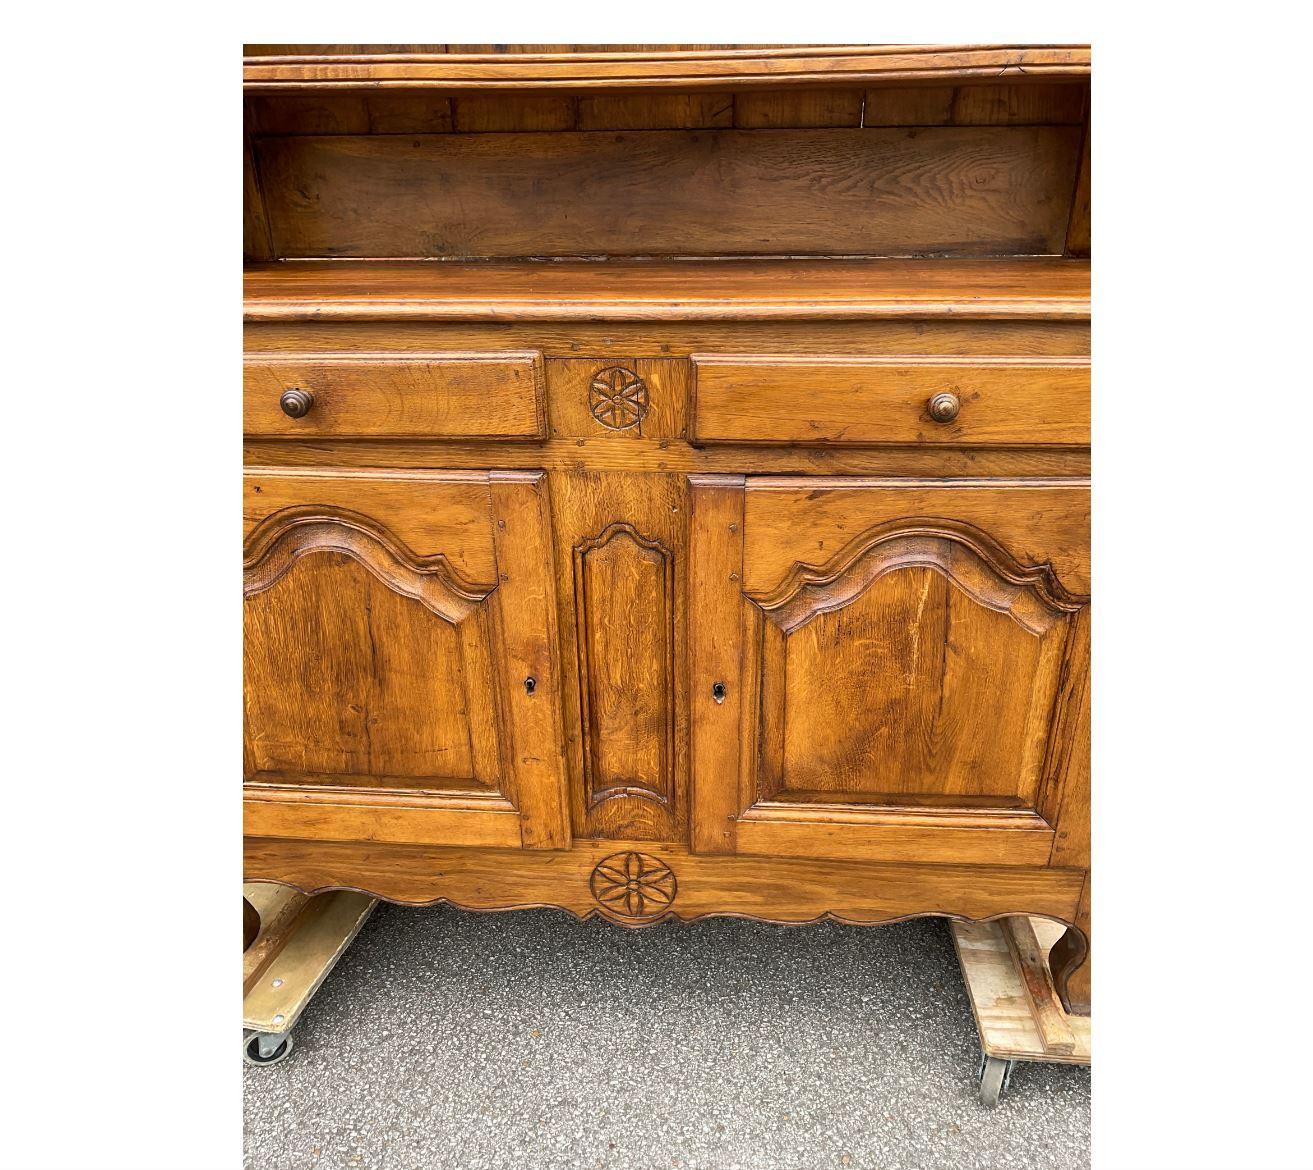 This 19th century French cupboard would make an excellent addition to any kitchen or dining space! It has three roomy shelves, perfect for dishes, and two cabinets and two drawers for storage underneath. The patina on this piece is excellent as well